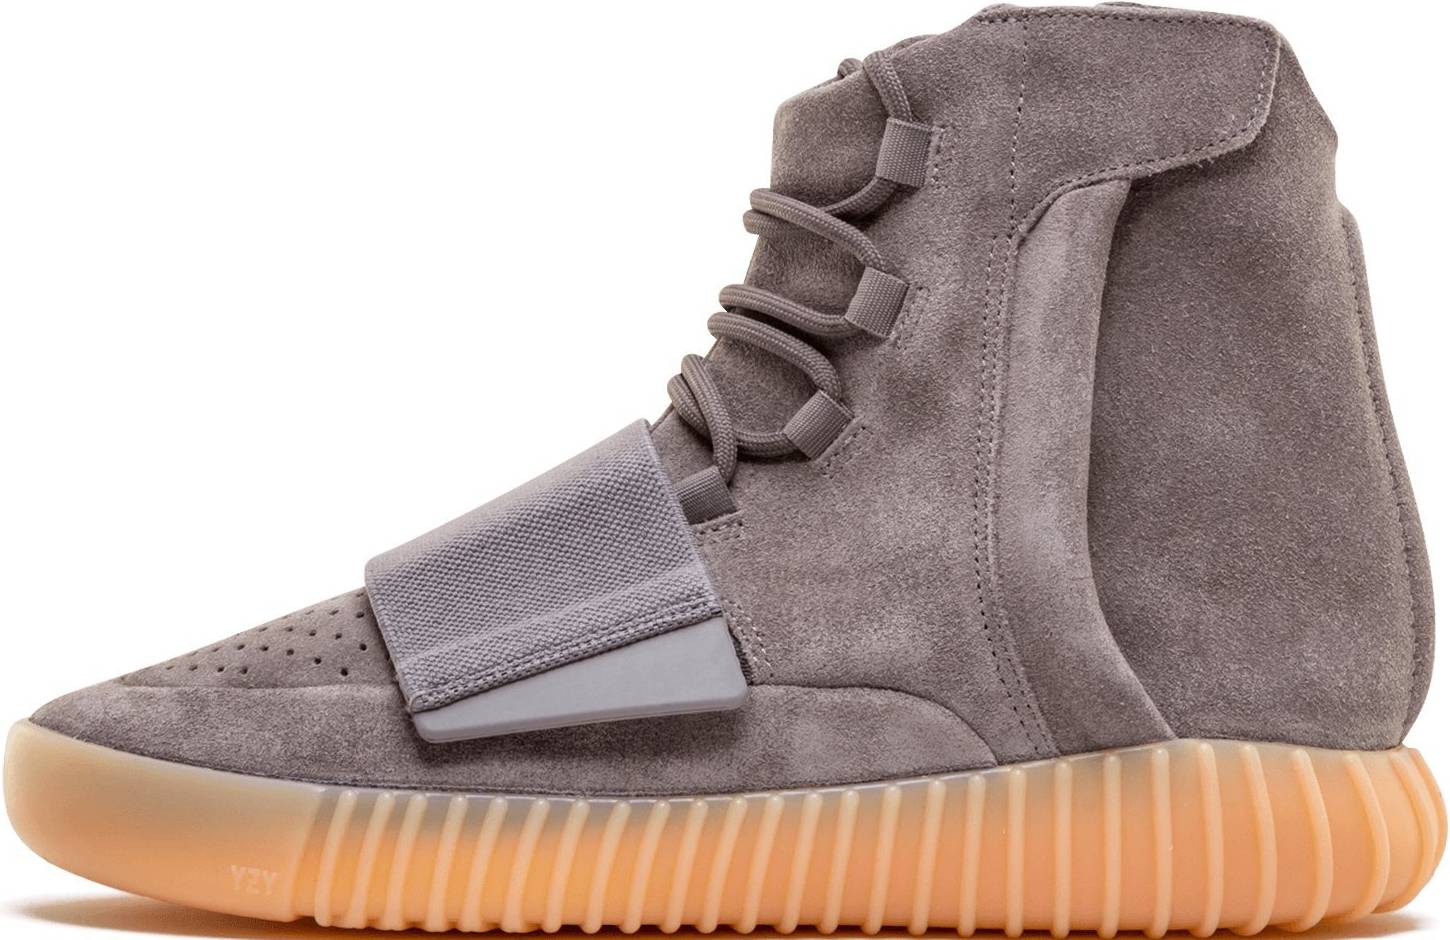 $805 + Review of Adidas Yeezy 750 Boost | RunRepeat